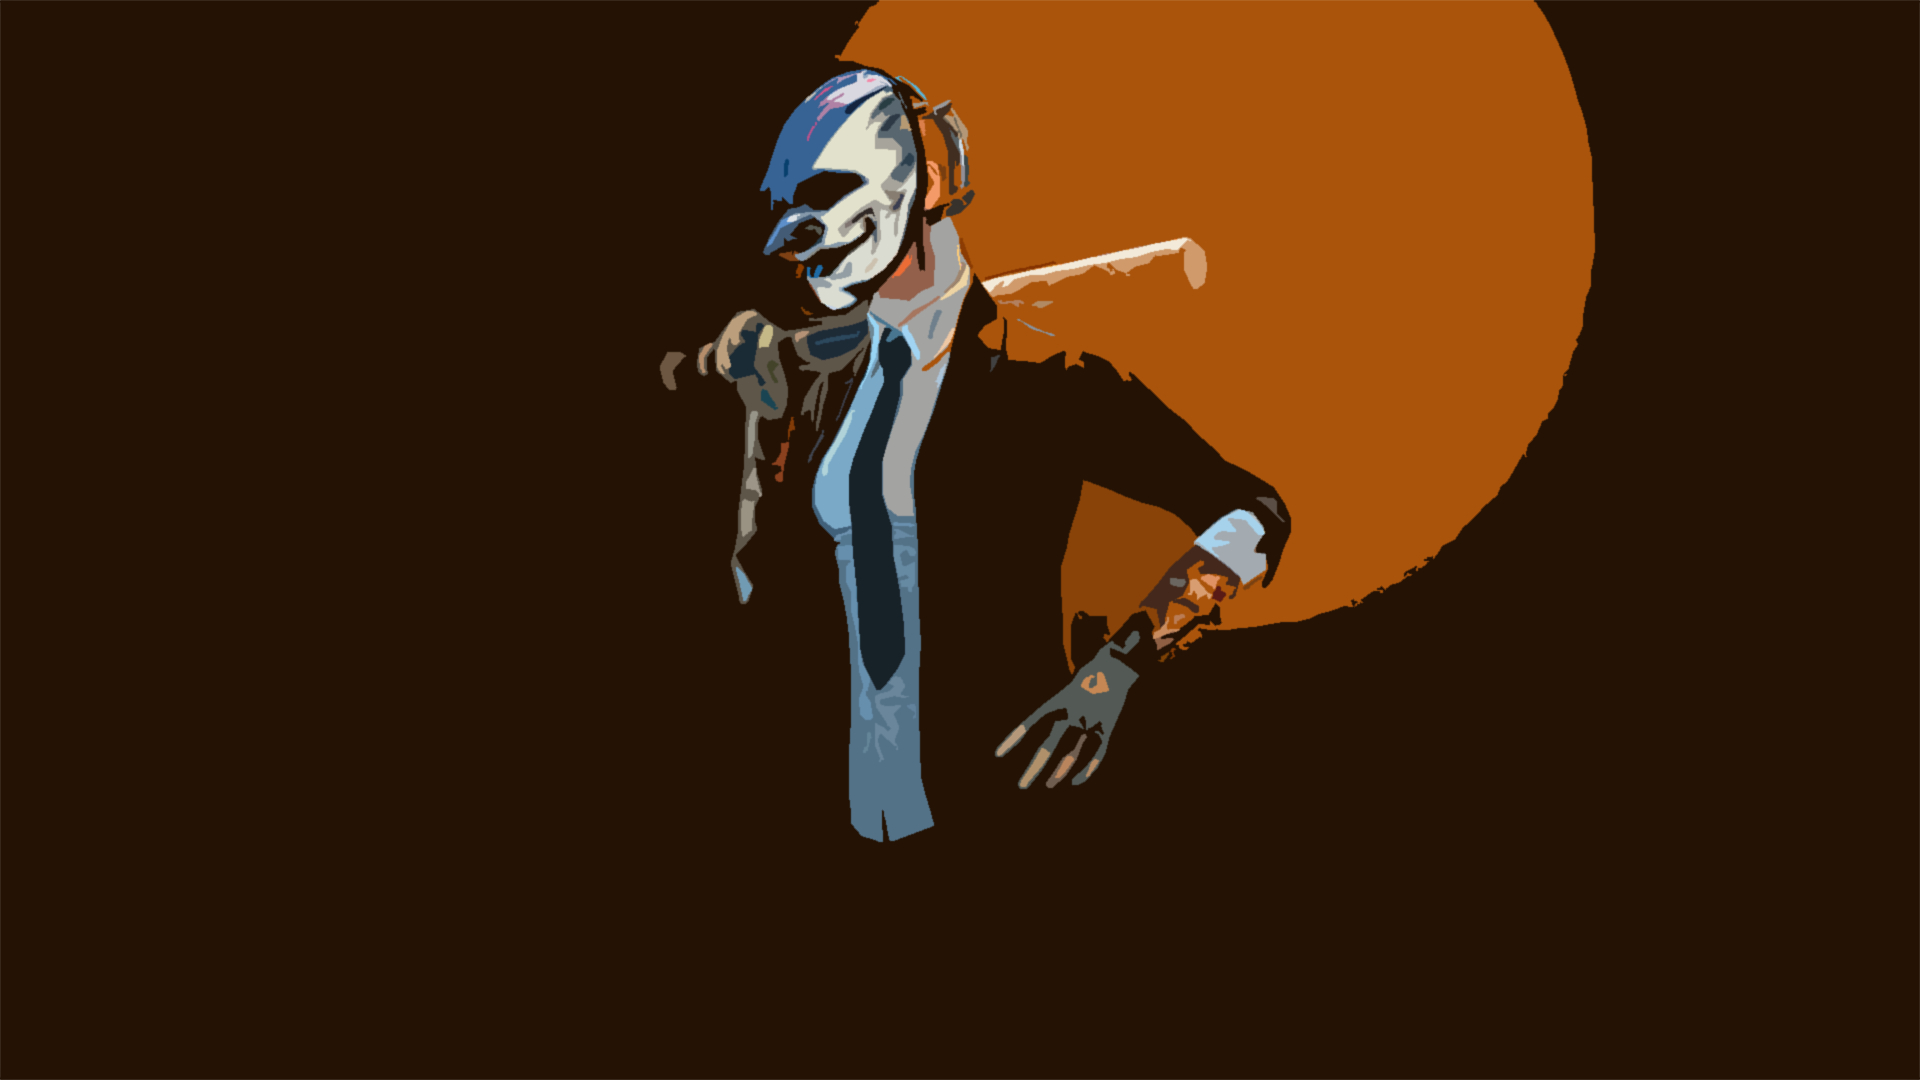 1920x1080 Sydney artistic | Payday 2 | Payday 2, Payday, Horror show